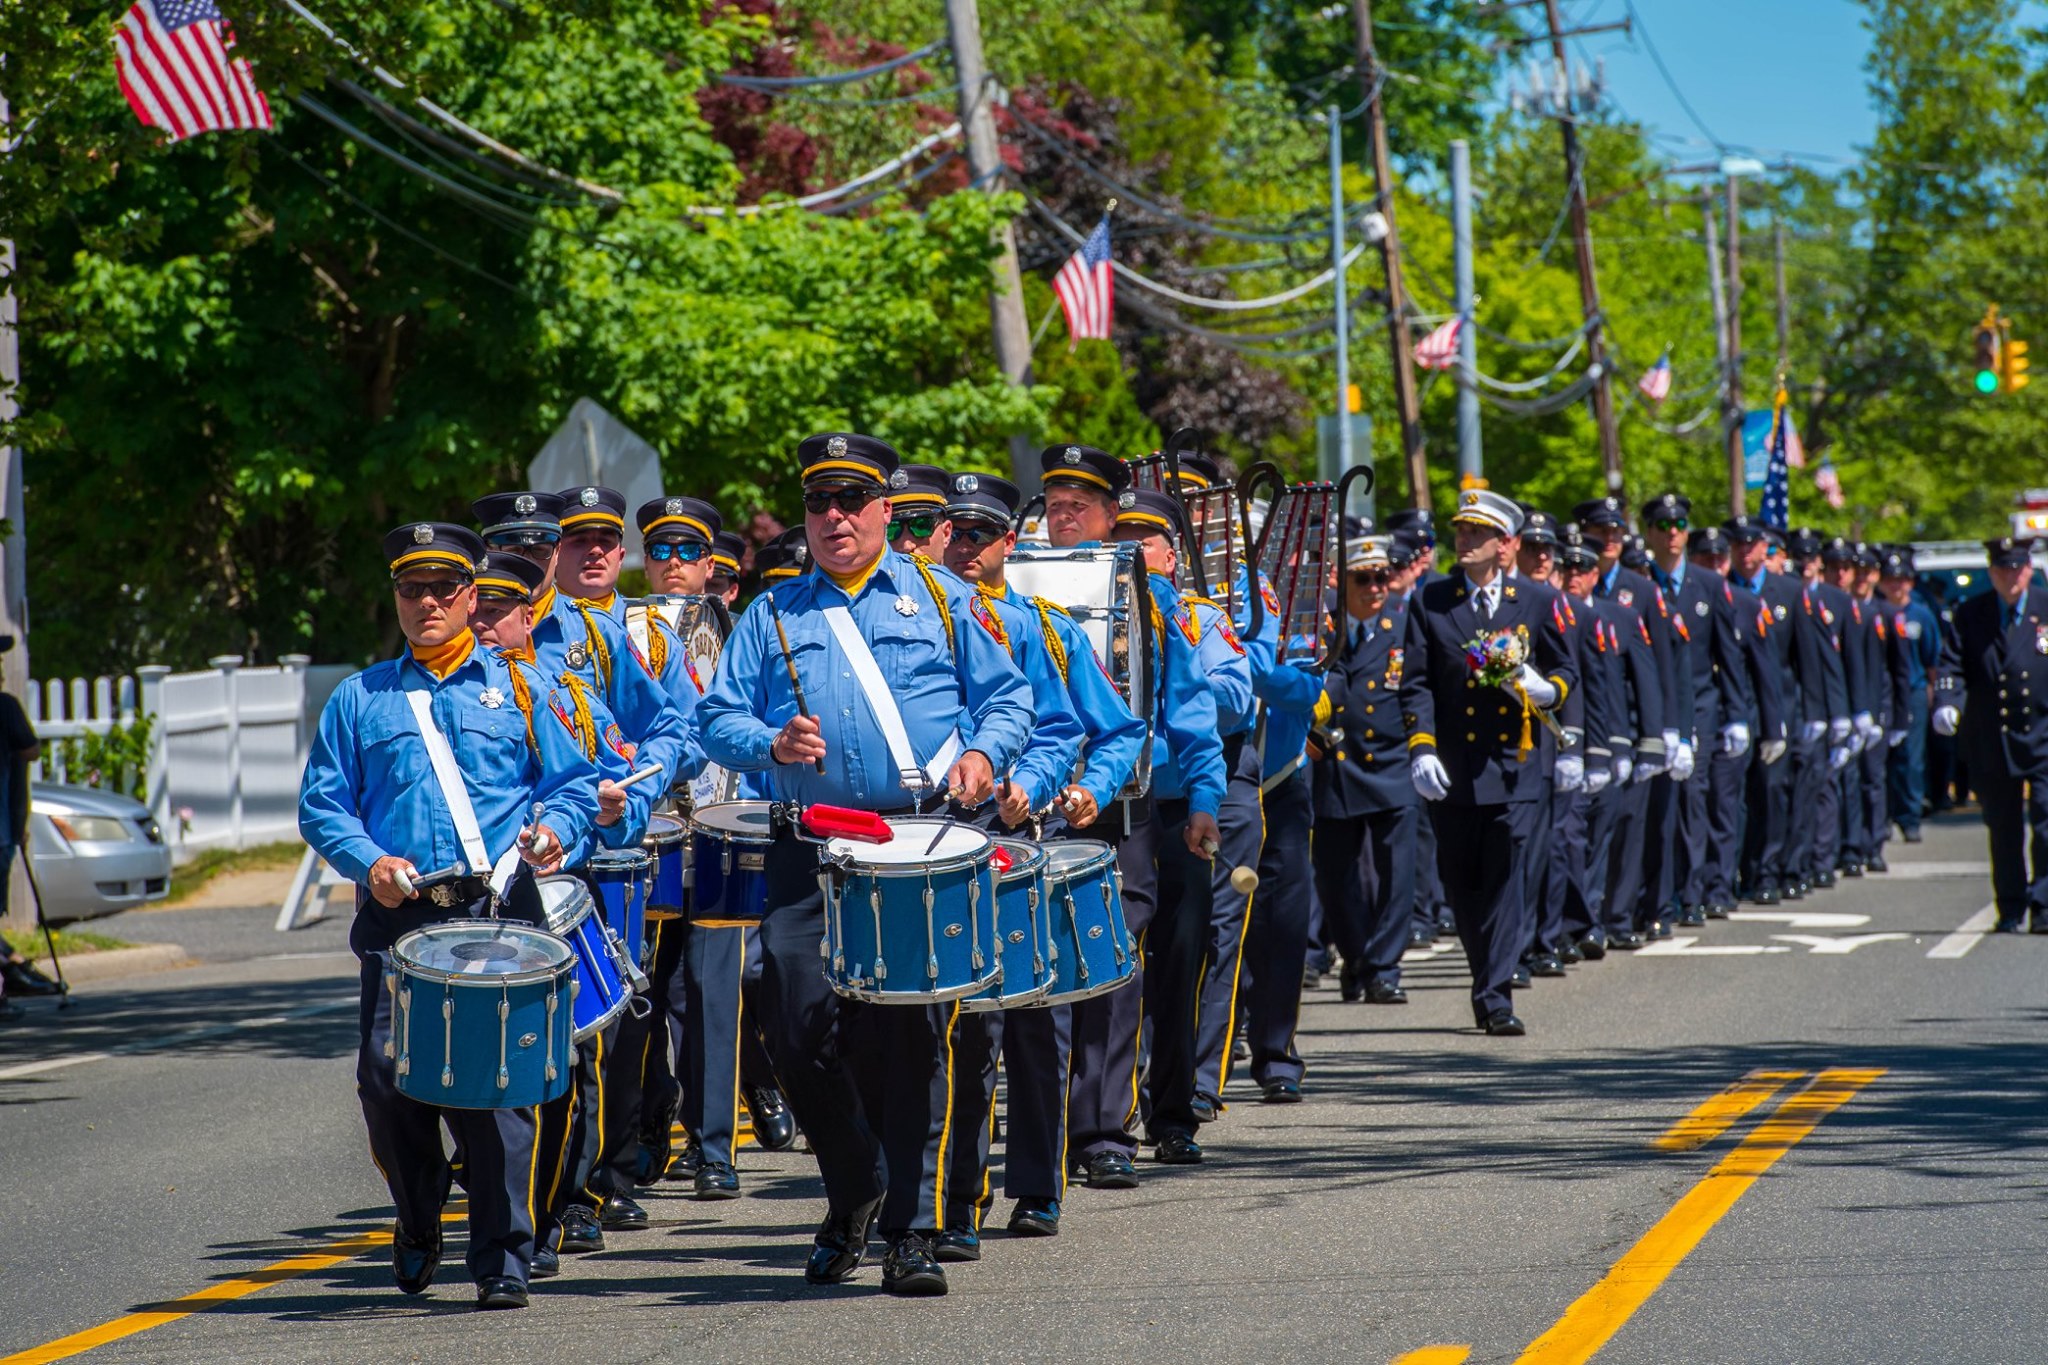  West Islip Fire Department marches down the street of the West Islip Memorial Day Parade.